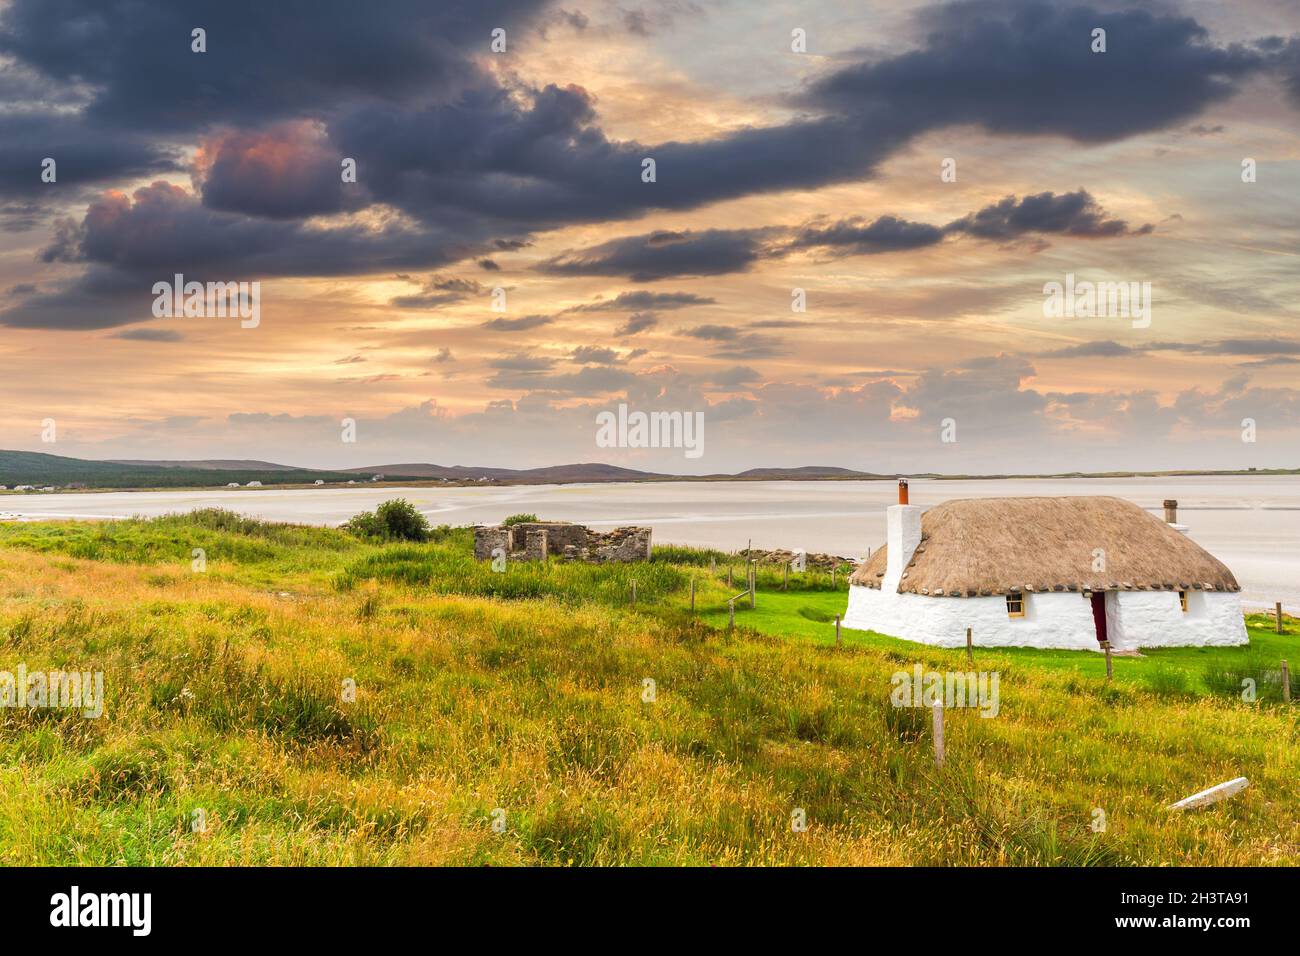 Traditionally built white cottage with thatched roof, next to the turquoise bay, with stormy cloudy dark skies above.island of North Uist, Scotland Stock Photo